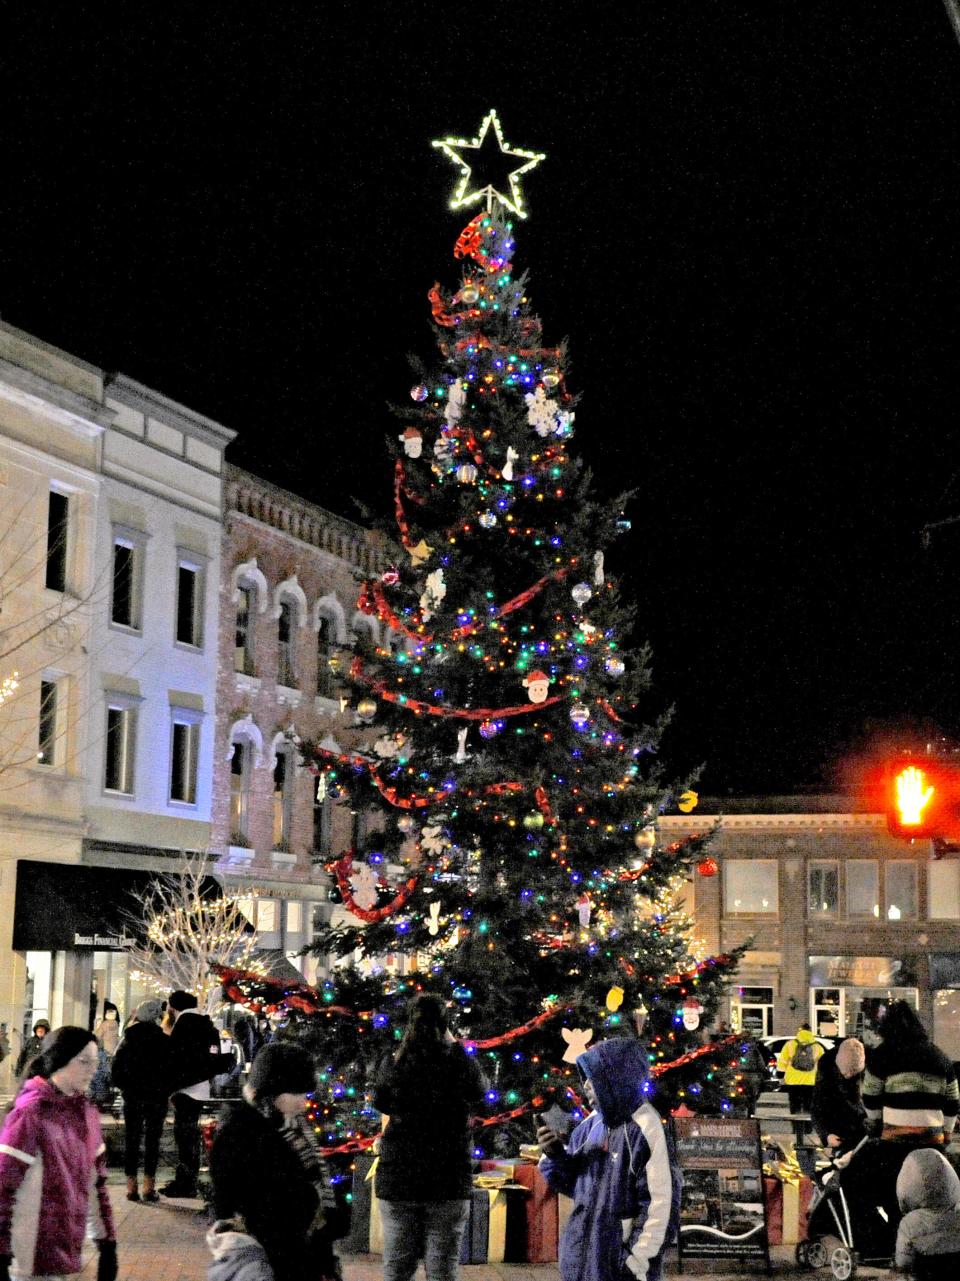 The Christmas tree stands tall and bright in downtown Wooster shortly after the lights were turned on Friday evening during the annual Window Wonderland event.